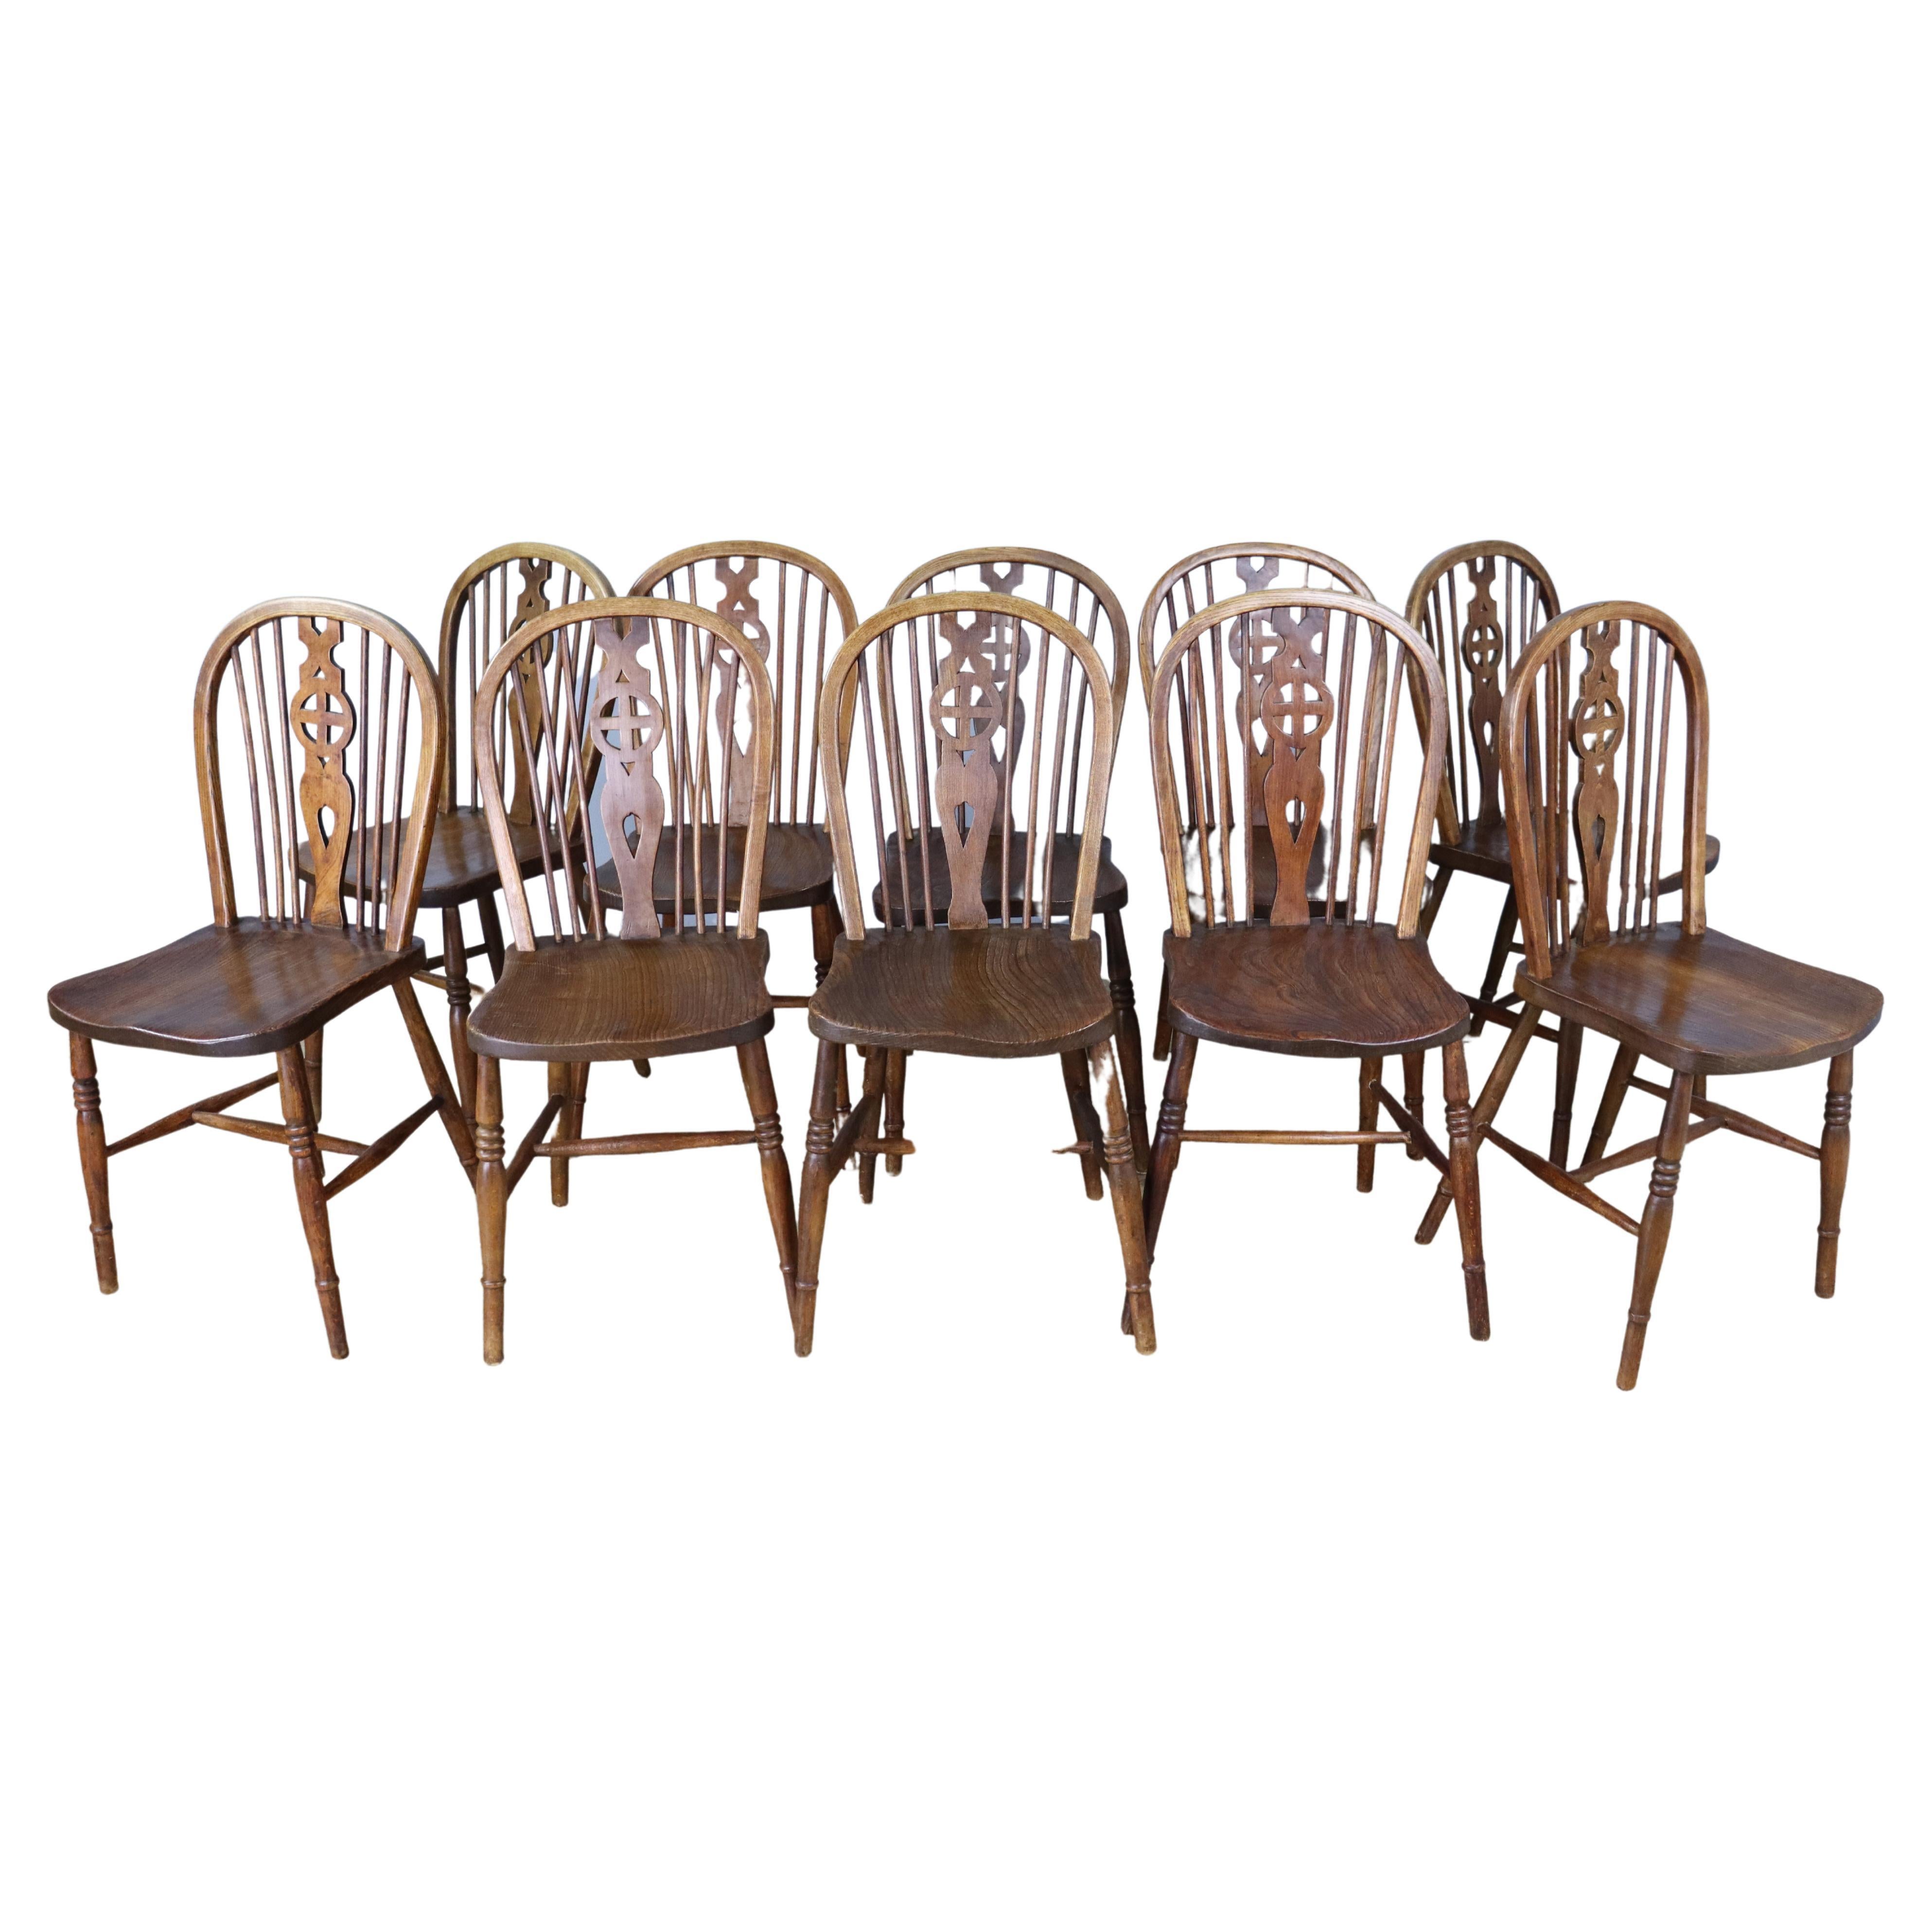 Set of 10 19th Century Elm Windsor Chairs